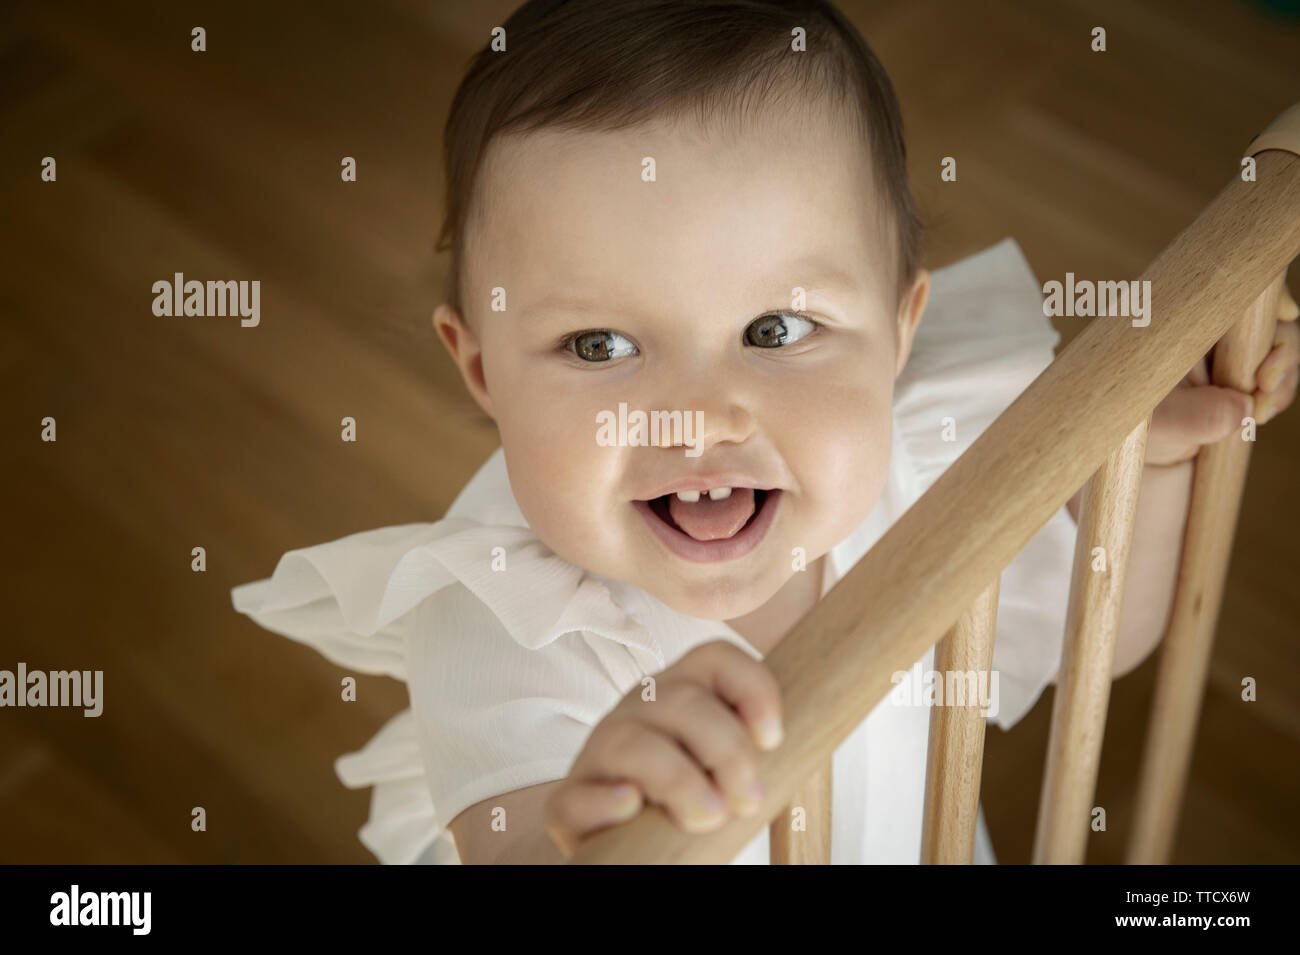 Cute little baby girl holding onto the top of safety gate Stock Photo